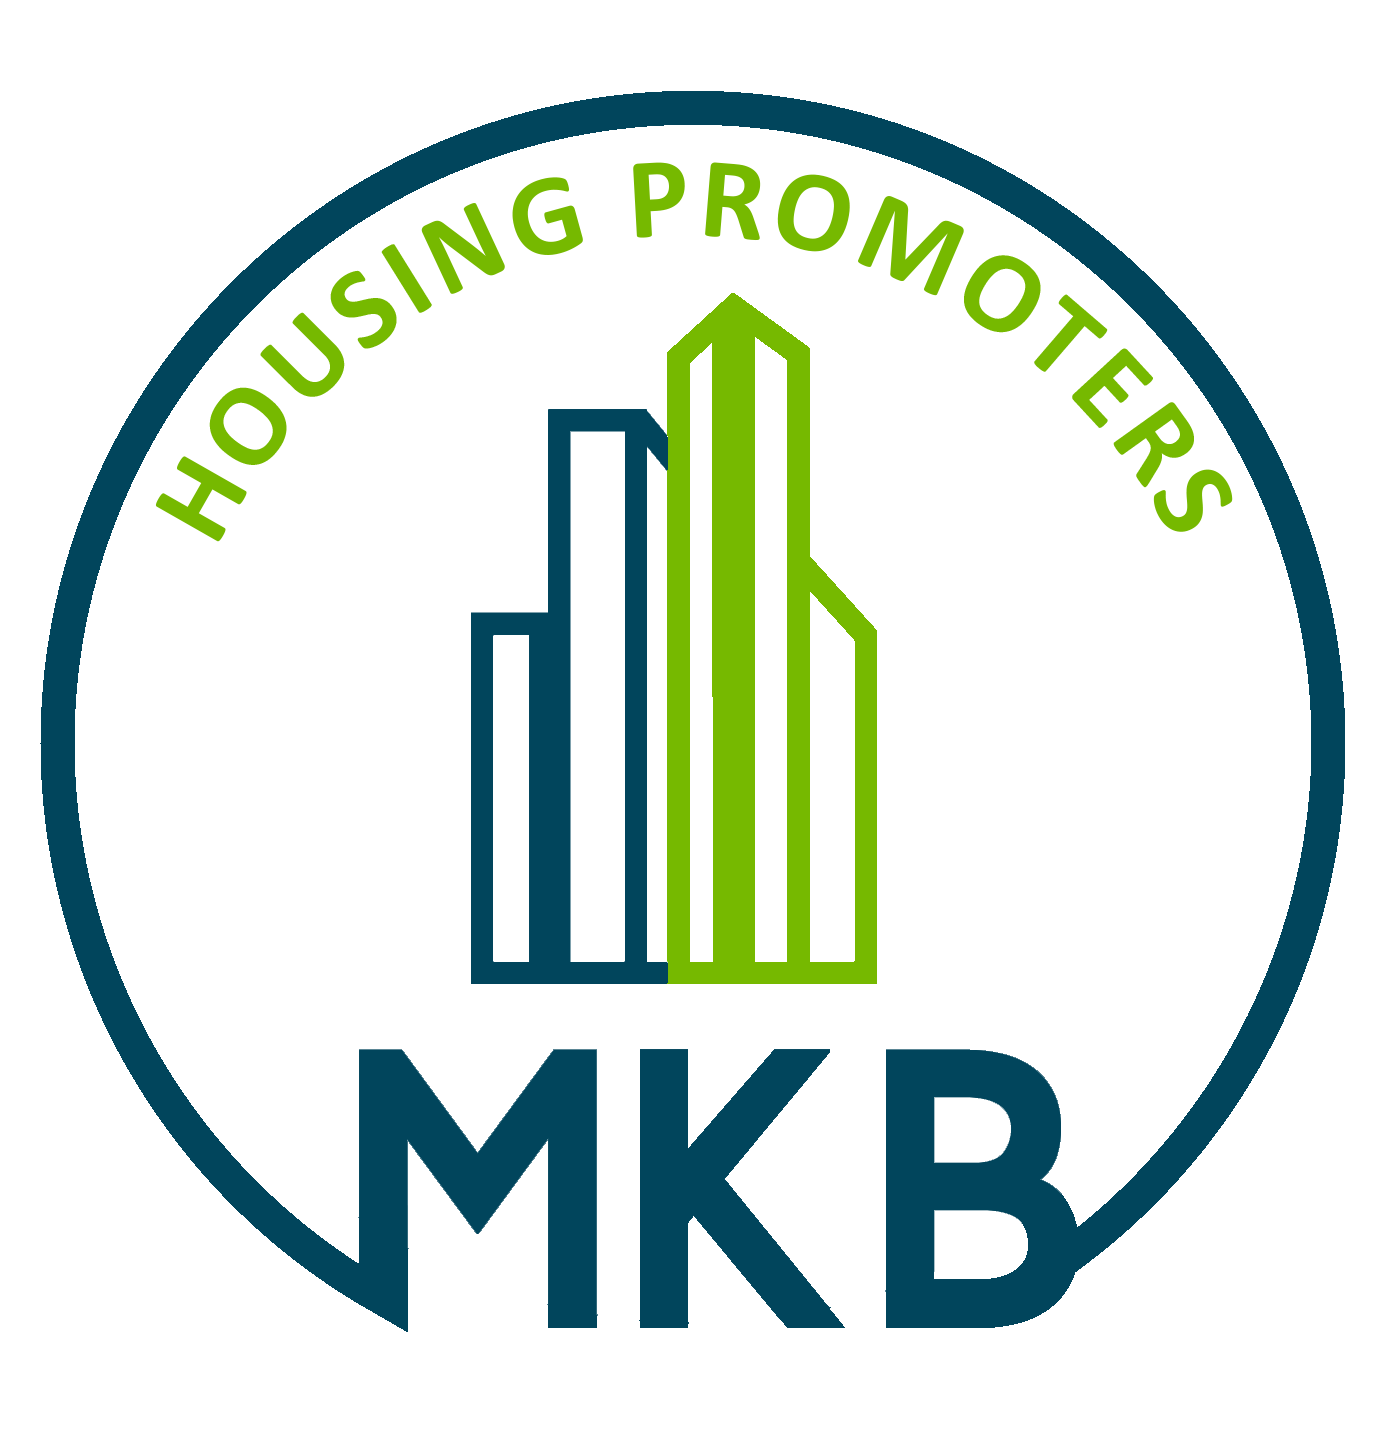 MKB Housing Promoters